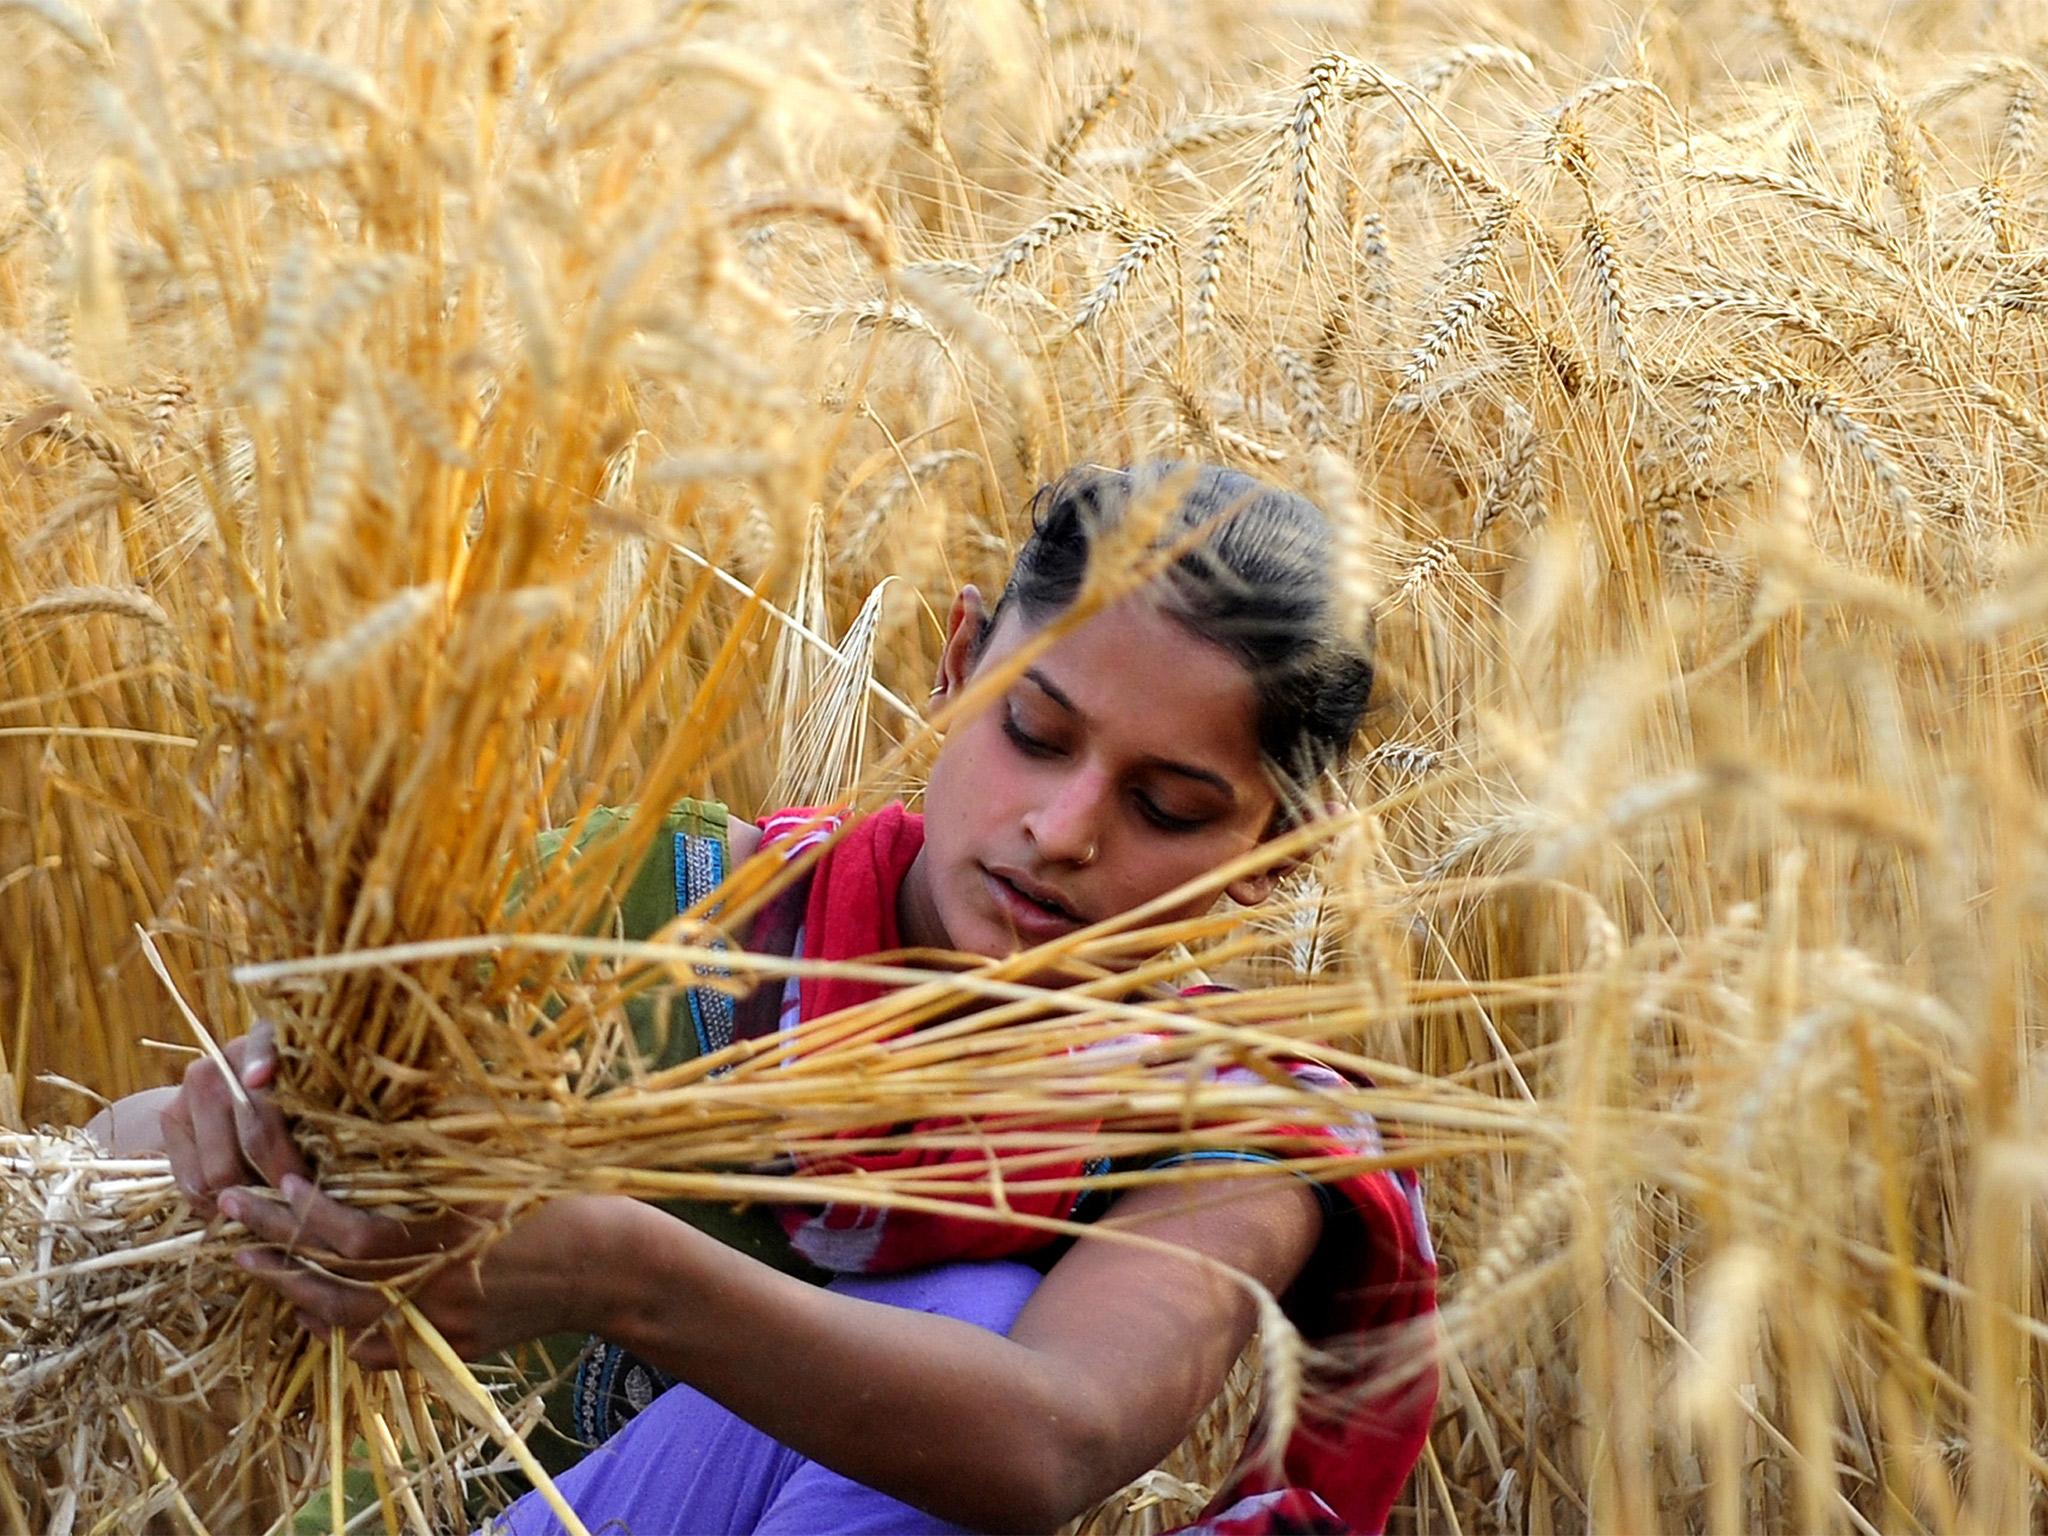 Indian farmers are set to receive higher prices for their produce